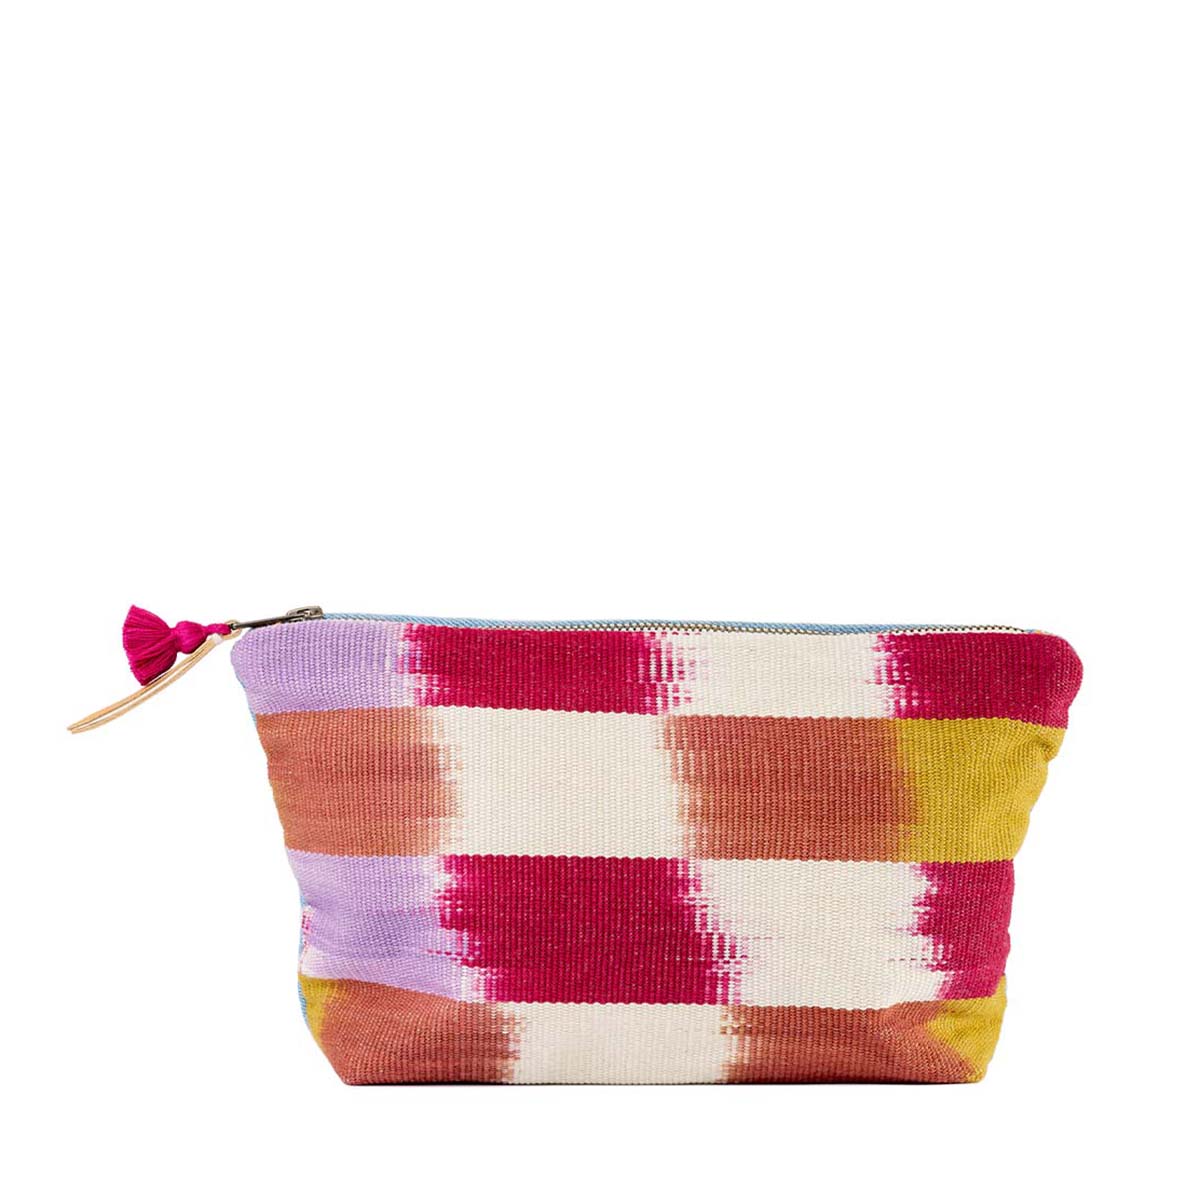 The front of the hand woven artisan Cristina Cosmetic Pouch in Raspberry Paleta pattern. It has a flame stitch red, purple, yellow ochre, and white pattern. It has a red mini tassel and a leather zipper pull. 